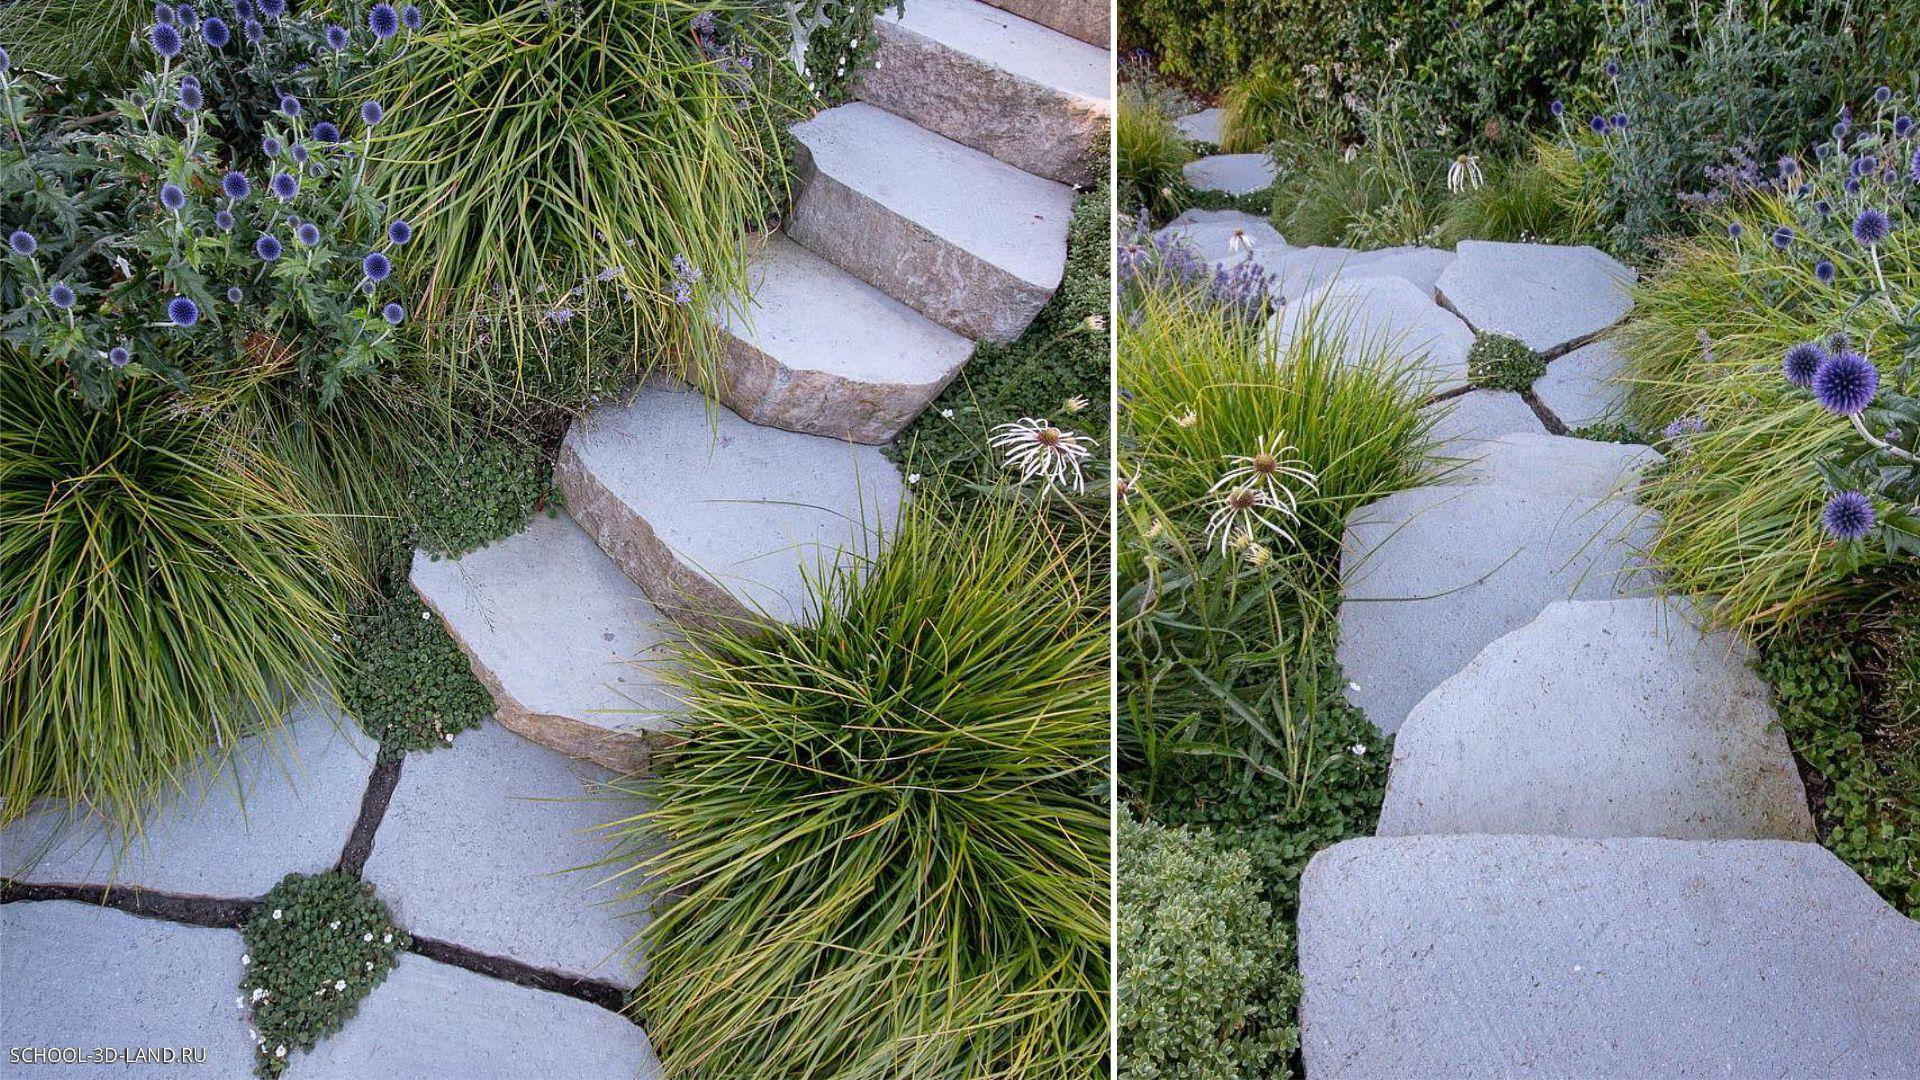 Paths and steps made of large sawn stone